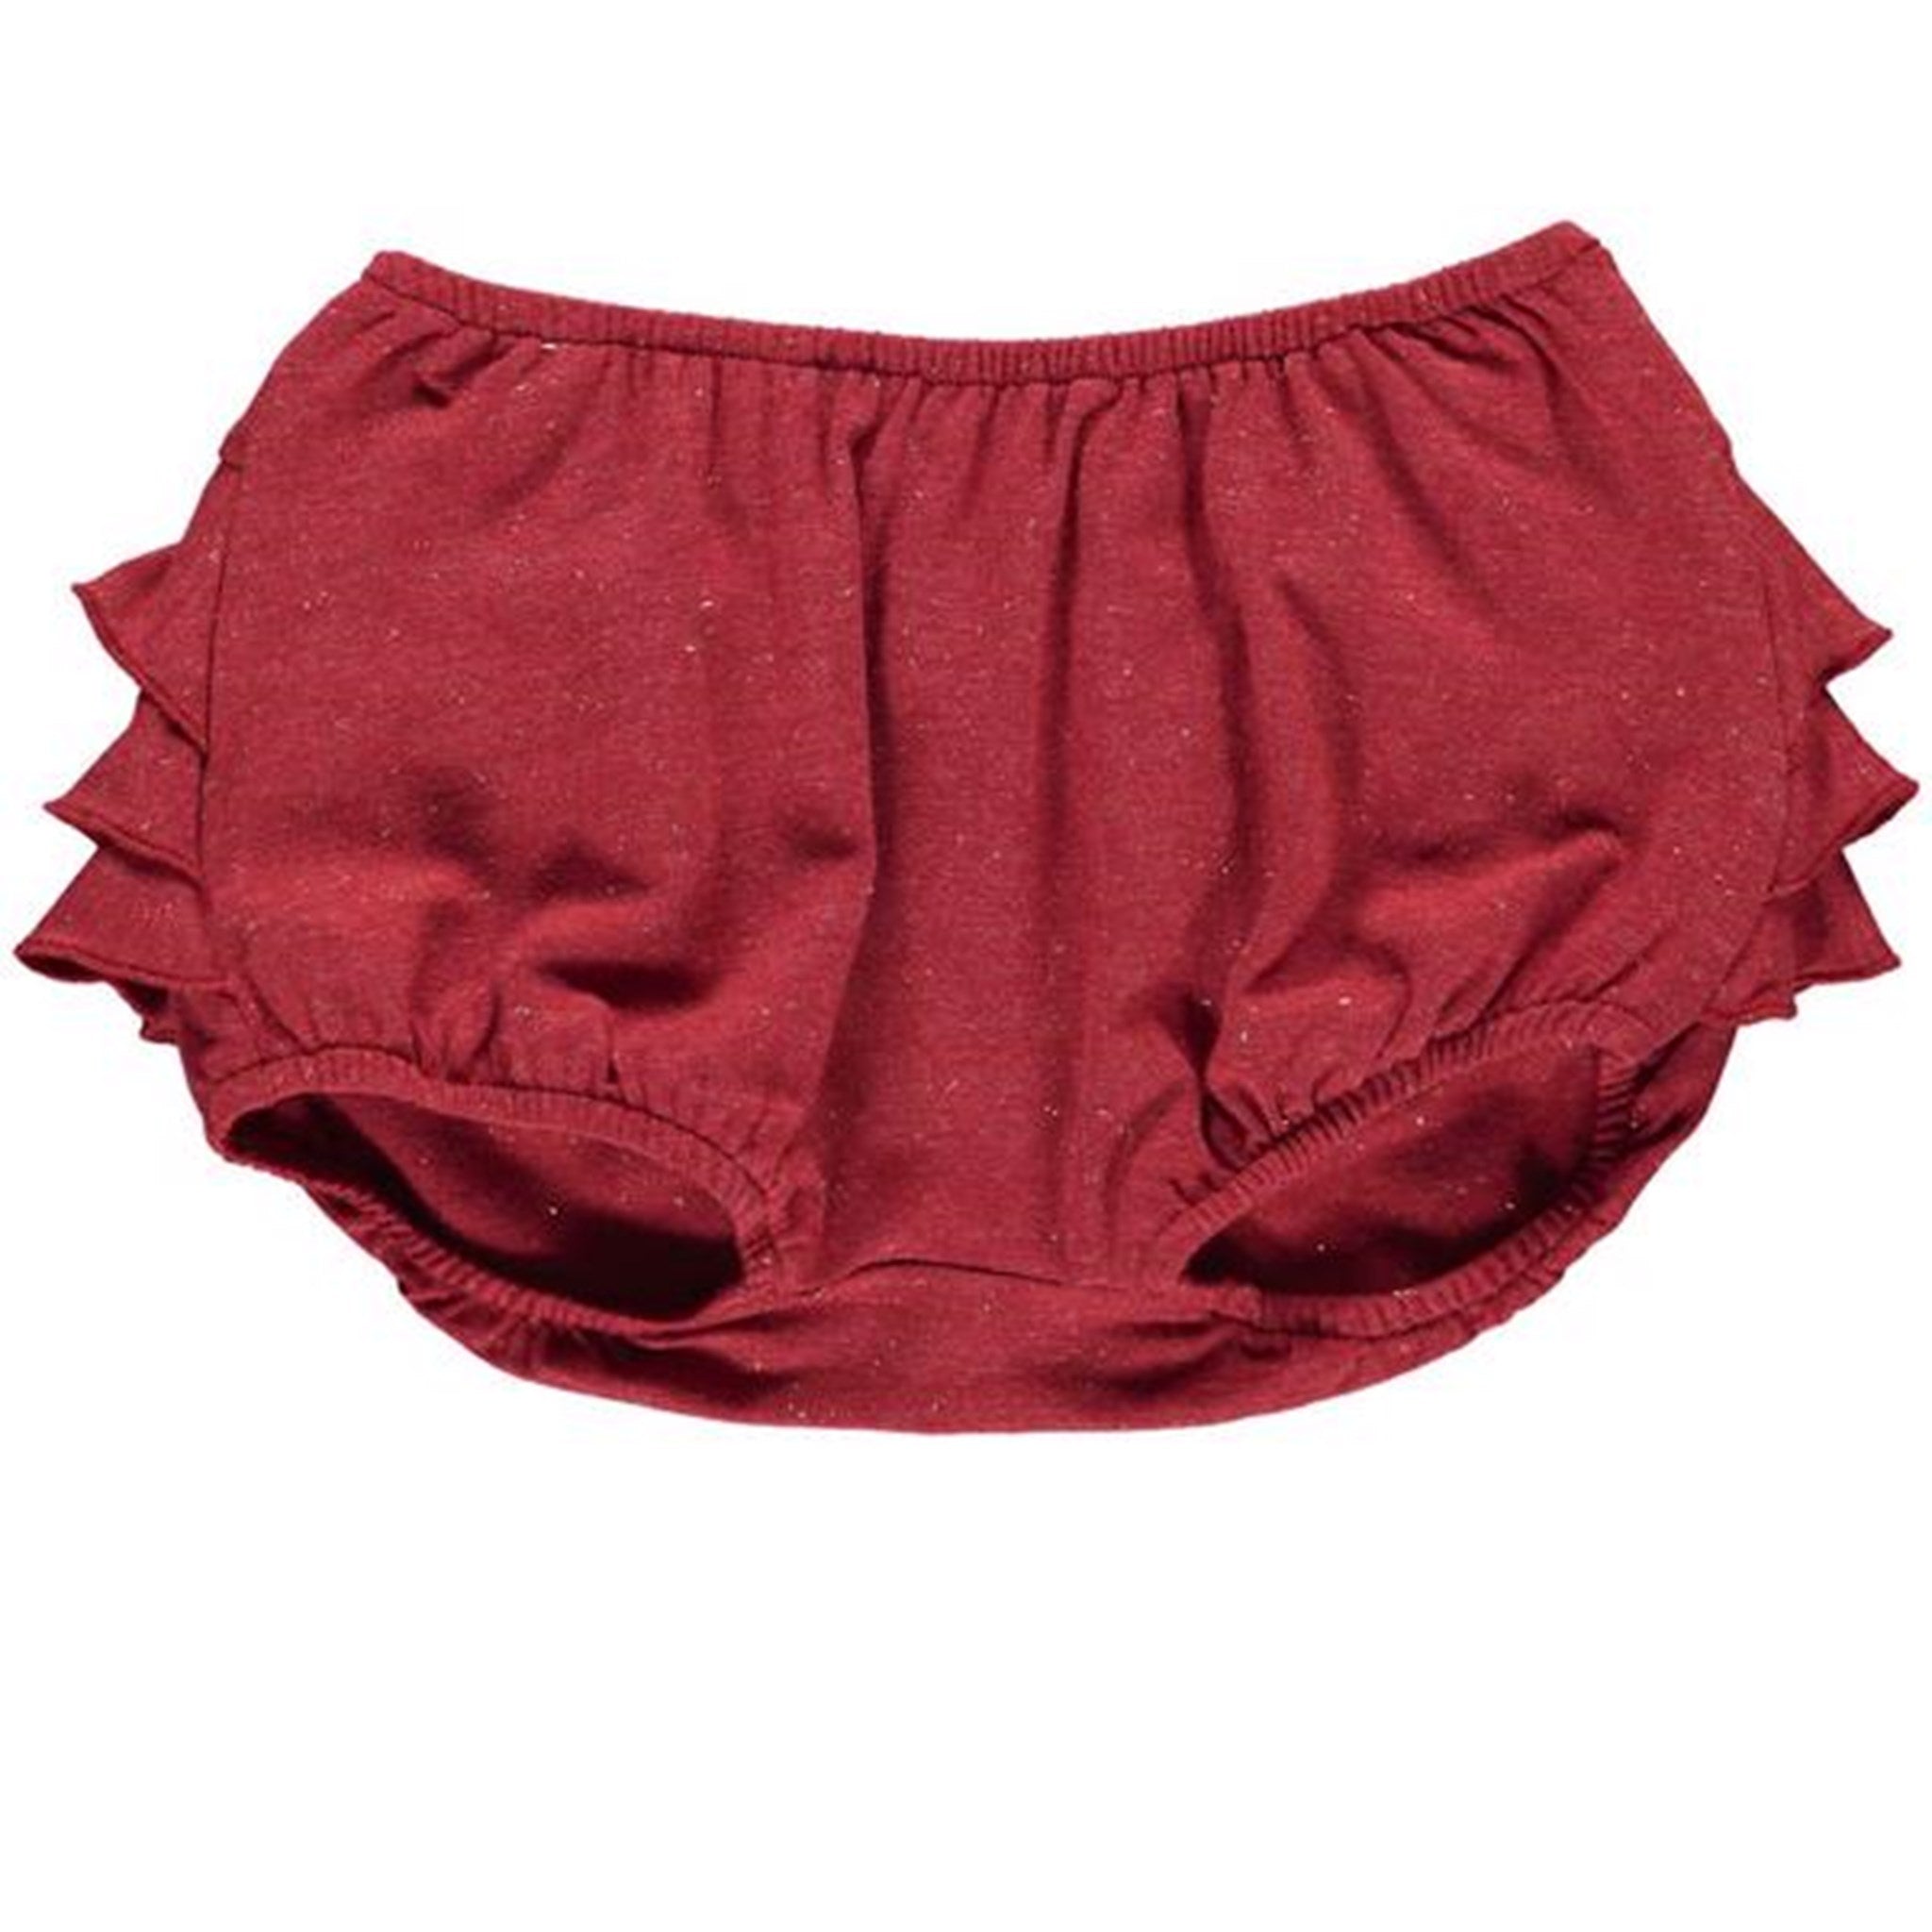 MarMar Red Gold Lurex Poppy Shorts/Bloomers